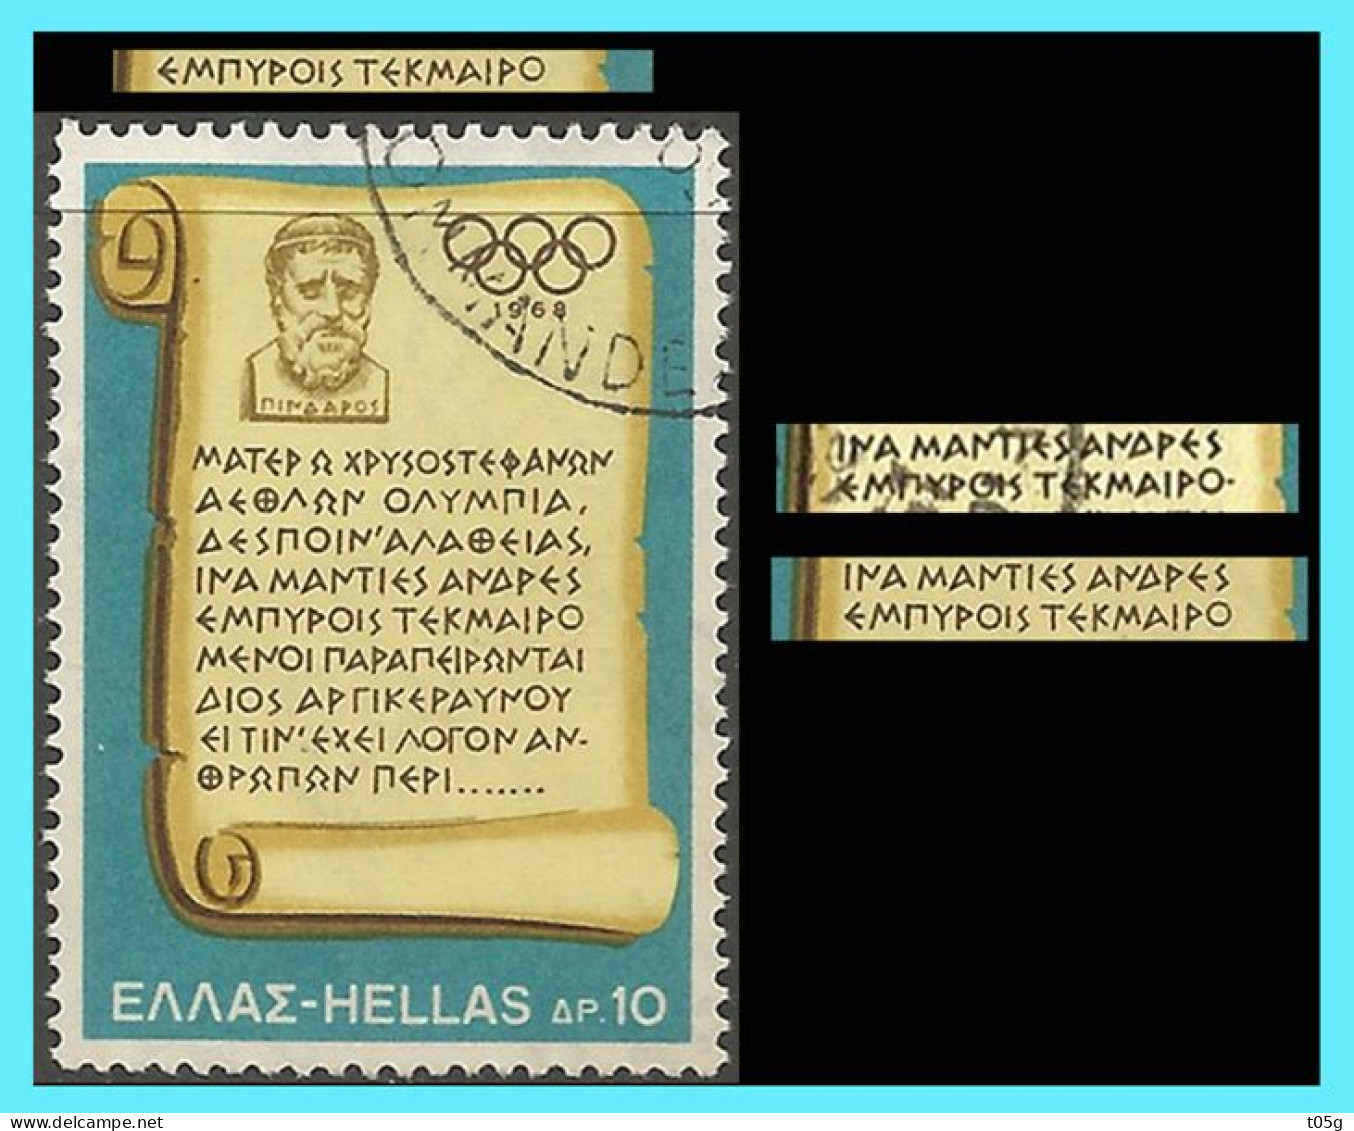 GREECE -GRECE- HELLAS 1968: Stamps (without --) TEKMAIPO Instead Of TEKMAIPO-- "Olympic Games Mexico" - Gebruikt